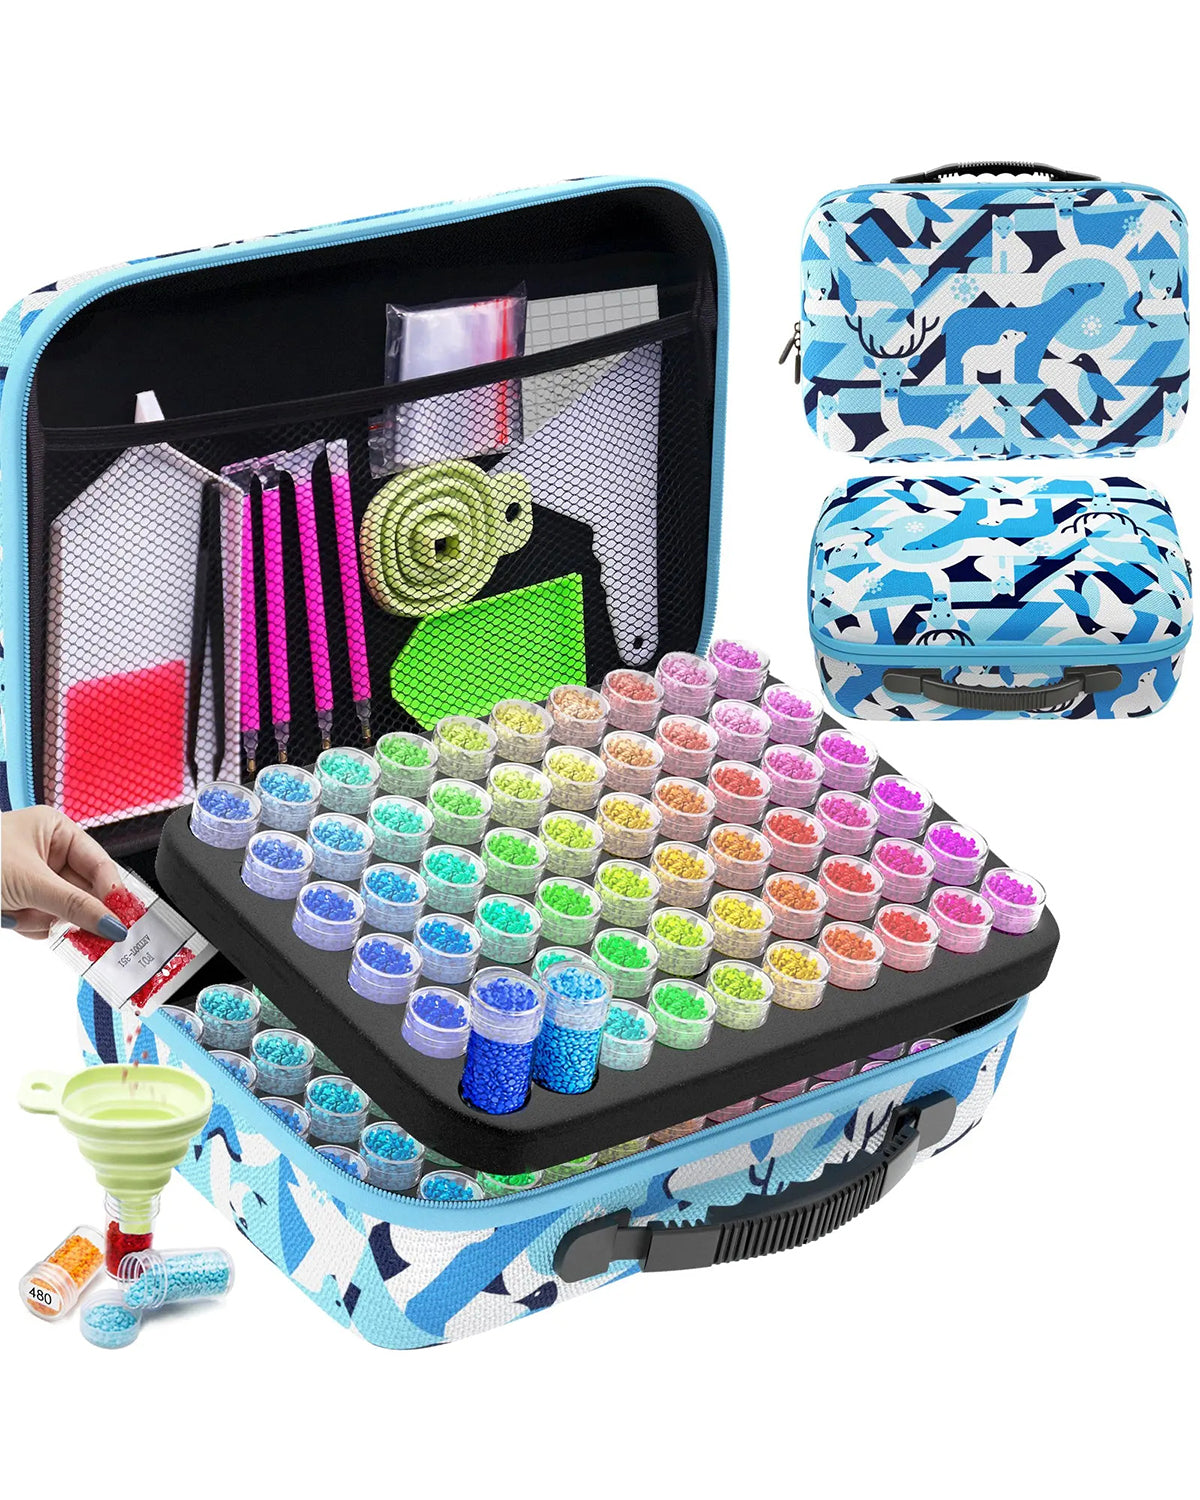 60 Bottles Holder Storage Box Kits 5D Diamond Painting Tool Case Container